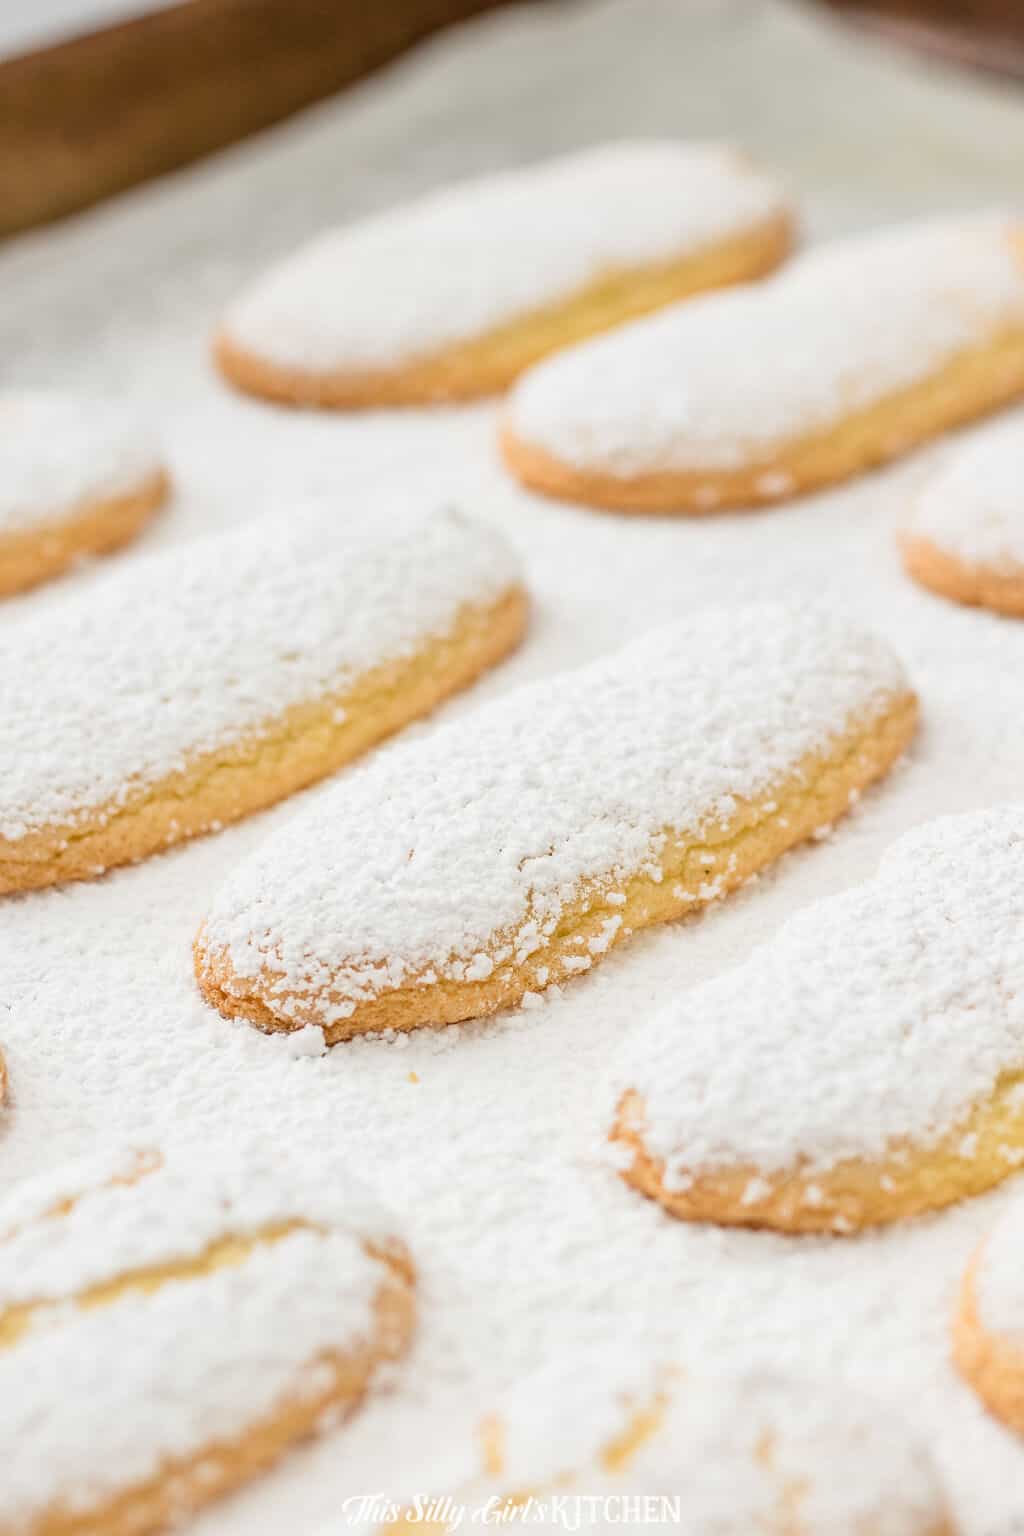 Ladyfinger cookies are light, crunchy cookies with a subtle sweetness. #Recipe from ThisSillyGirlsKitchen.com #ladyfinger #tiramisu #cookie #ladyfingersdessert